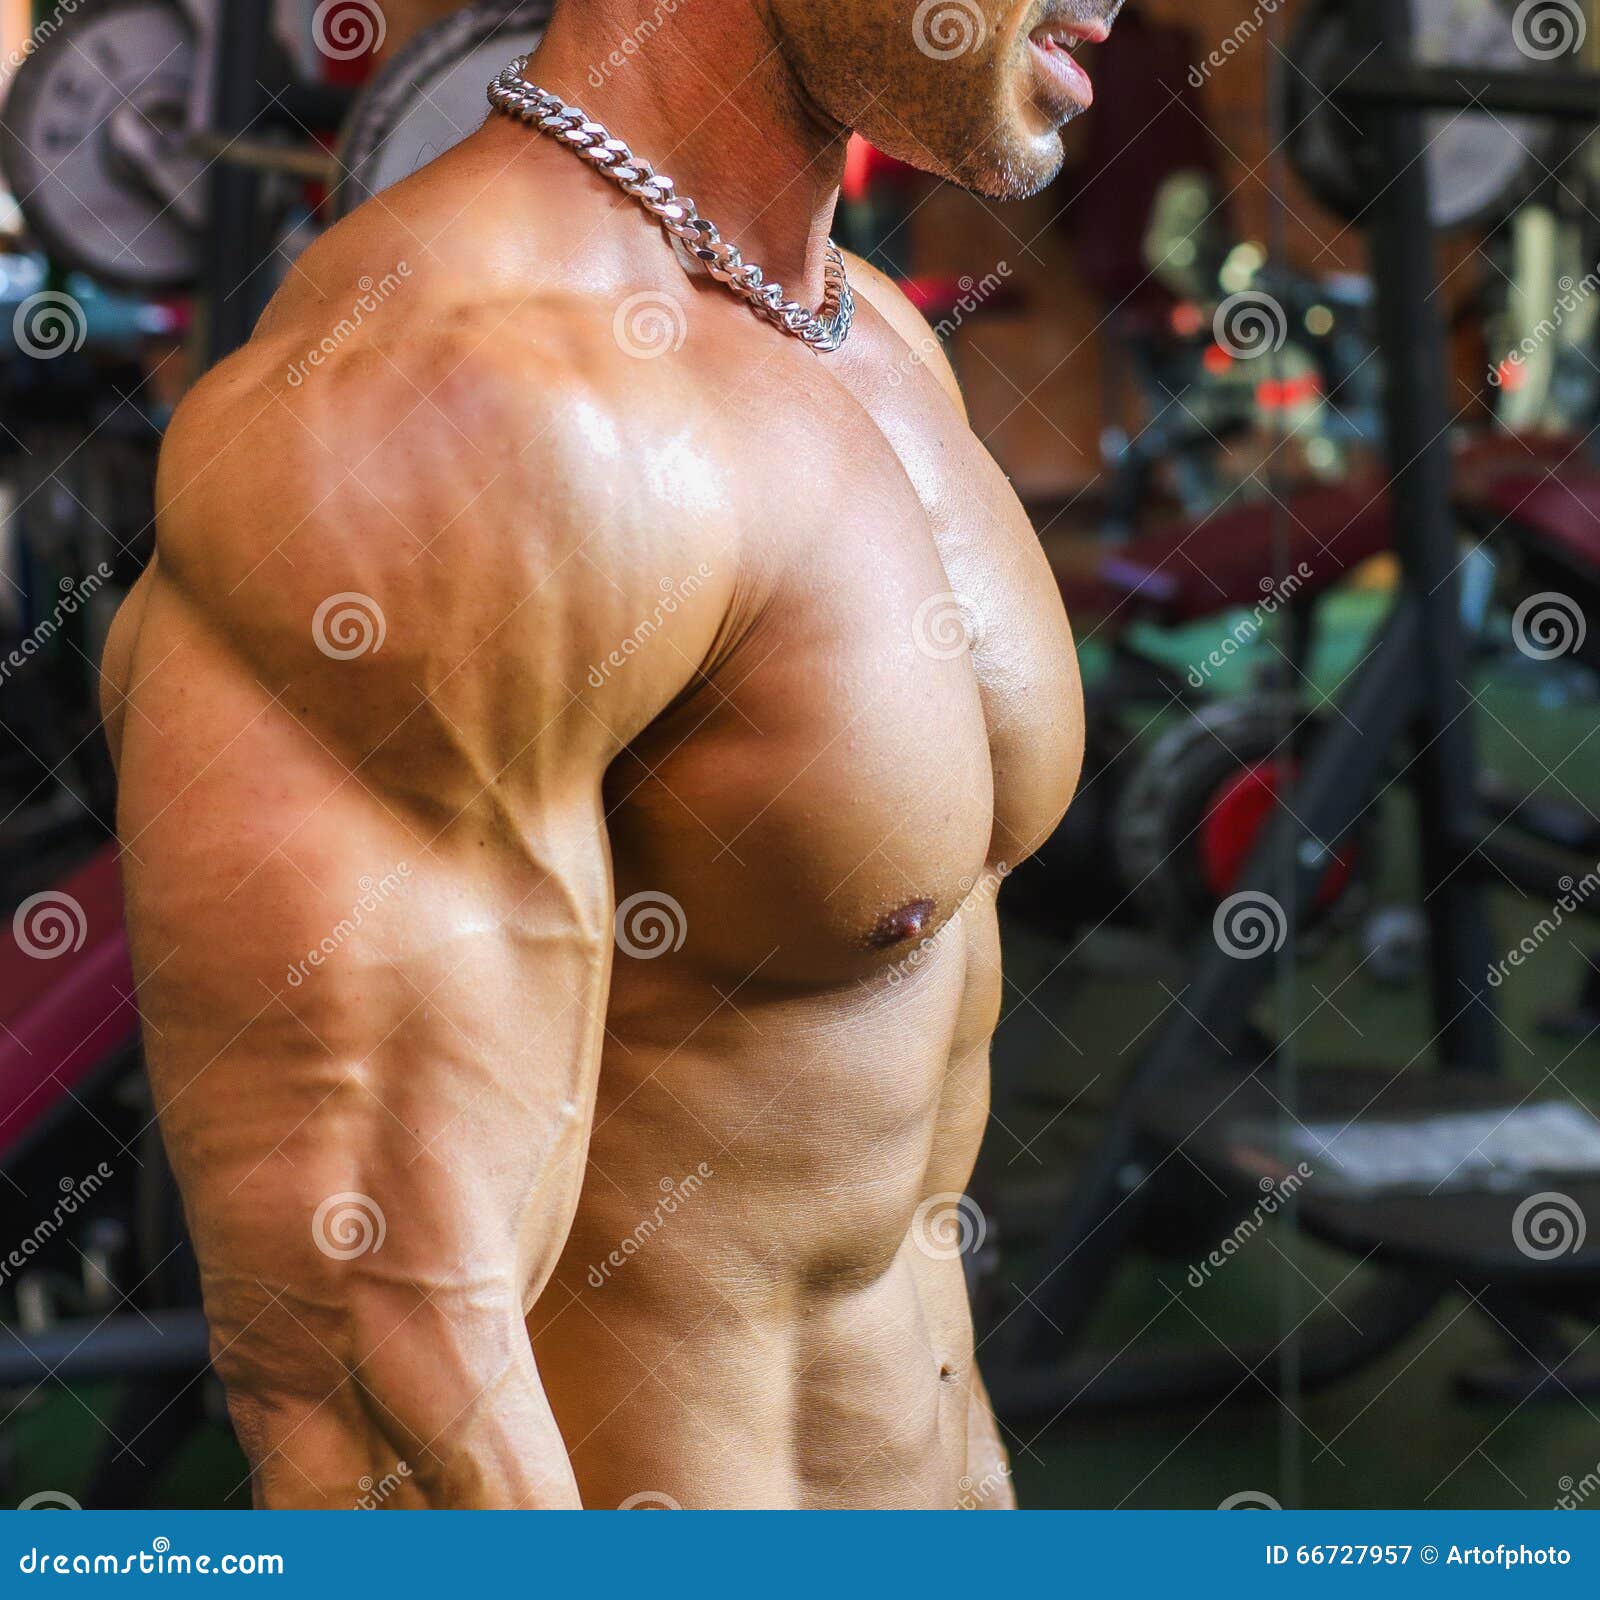 Bodybuilder Working Out At Gym Side View Of Muscular Chest Pecs Arms Stock Image Image Of